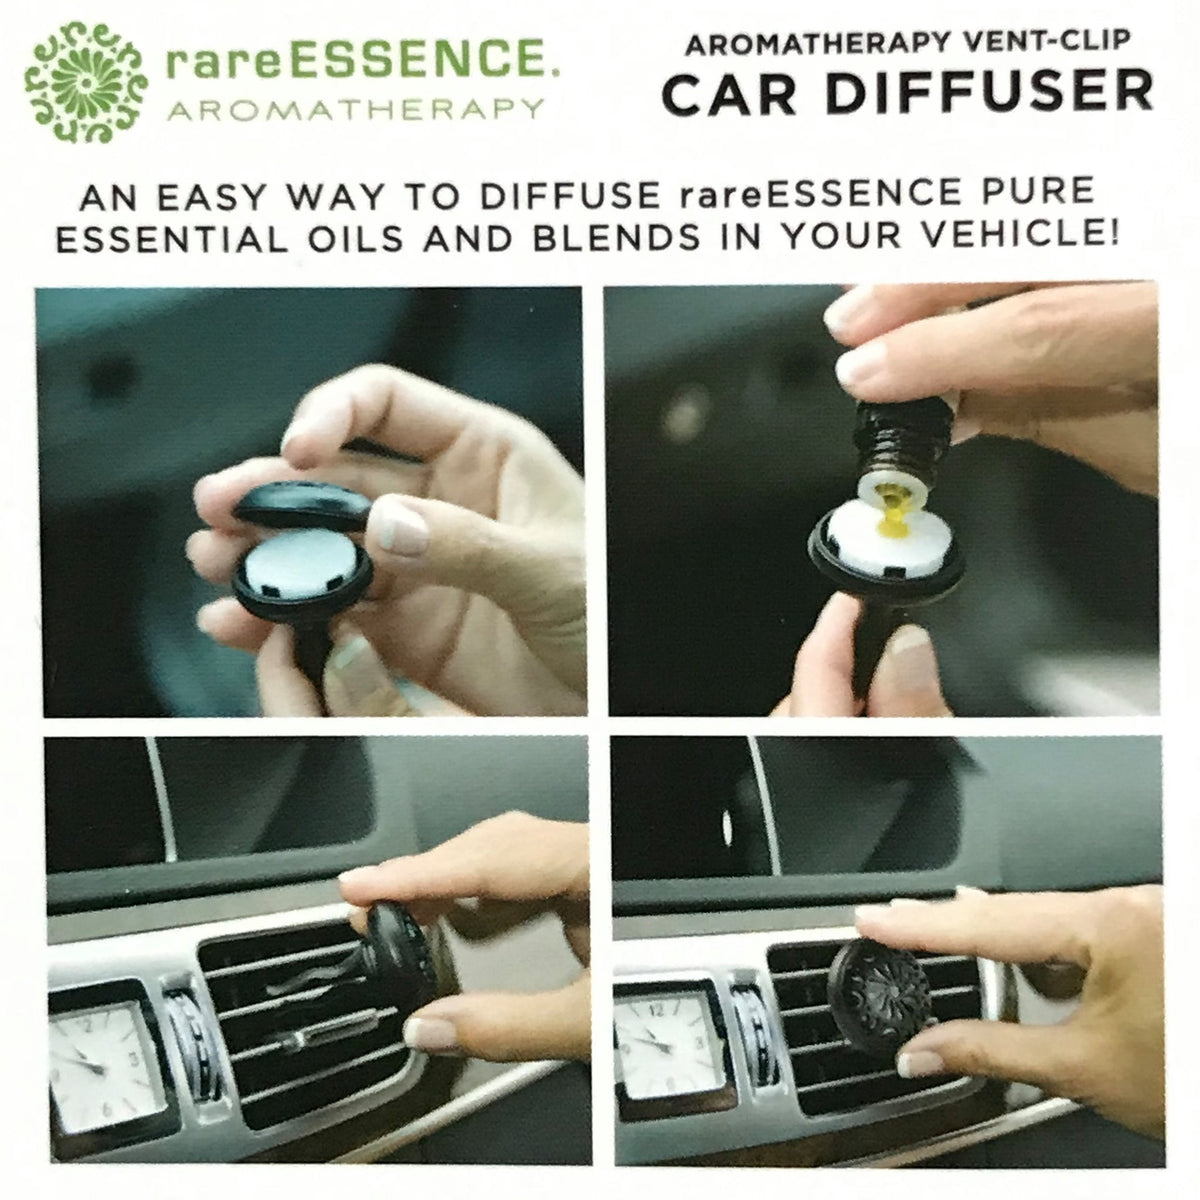 Car diffuser for essential oils. Just add a couple drops of your favorite essential oil and slide the diffuser onto your air vent.